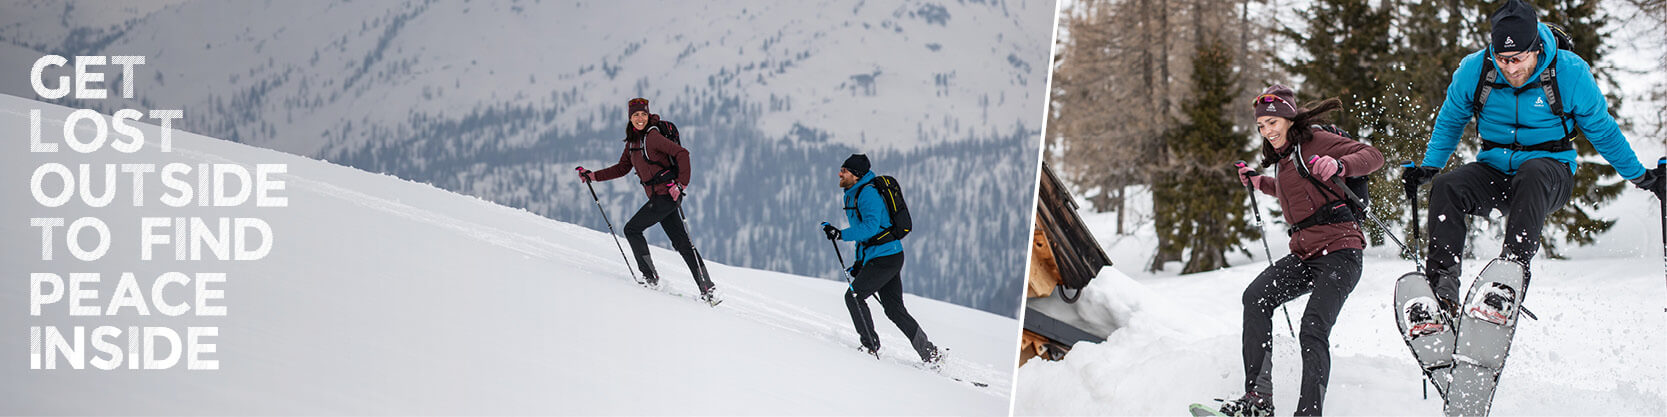 Snowshoeing with ODLO equipment